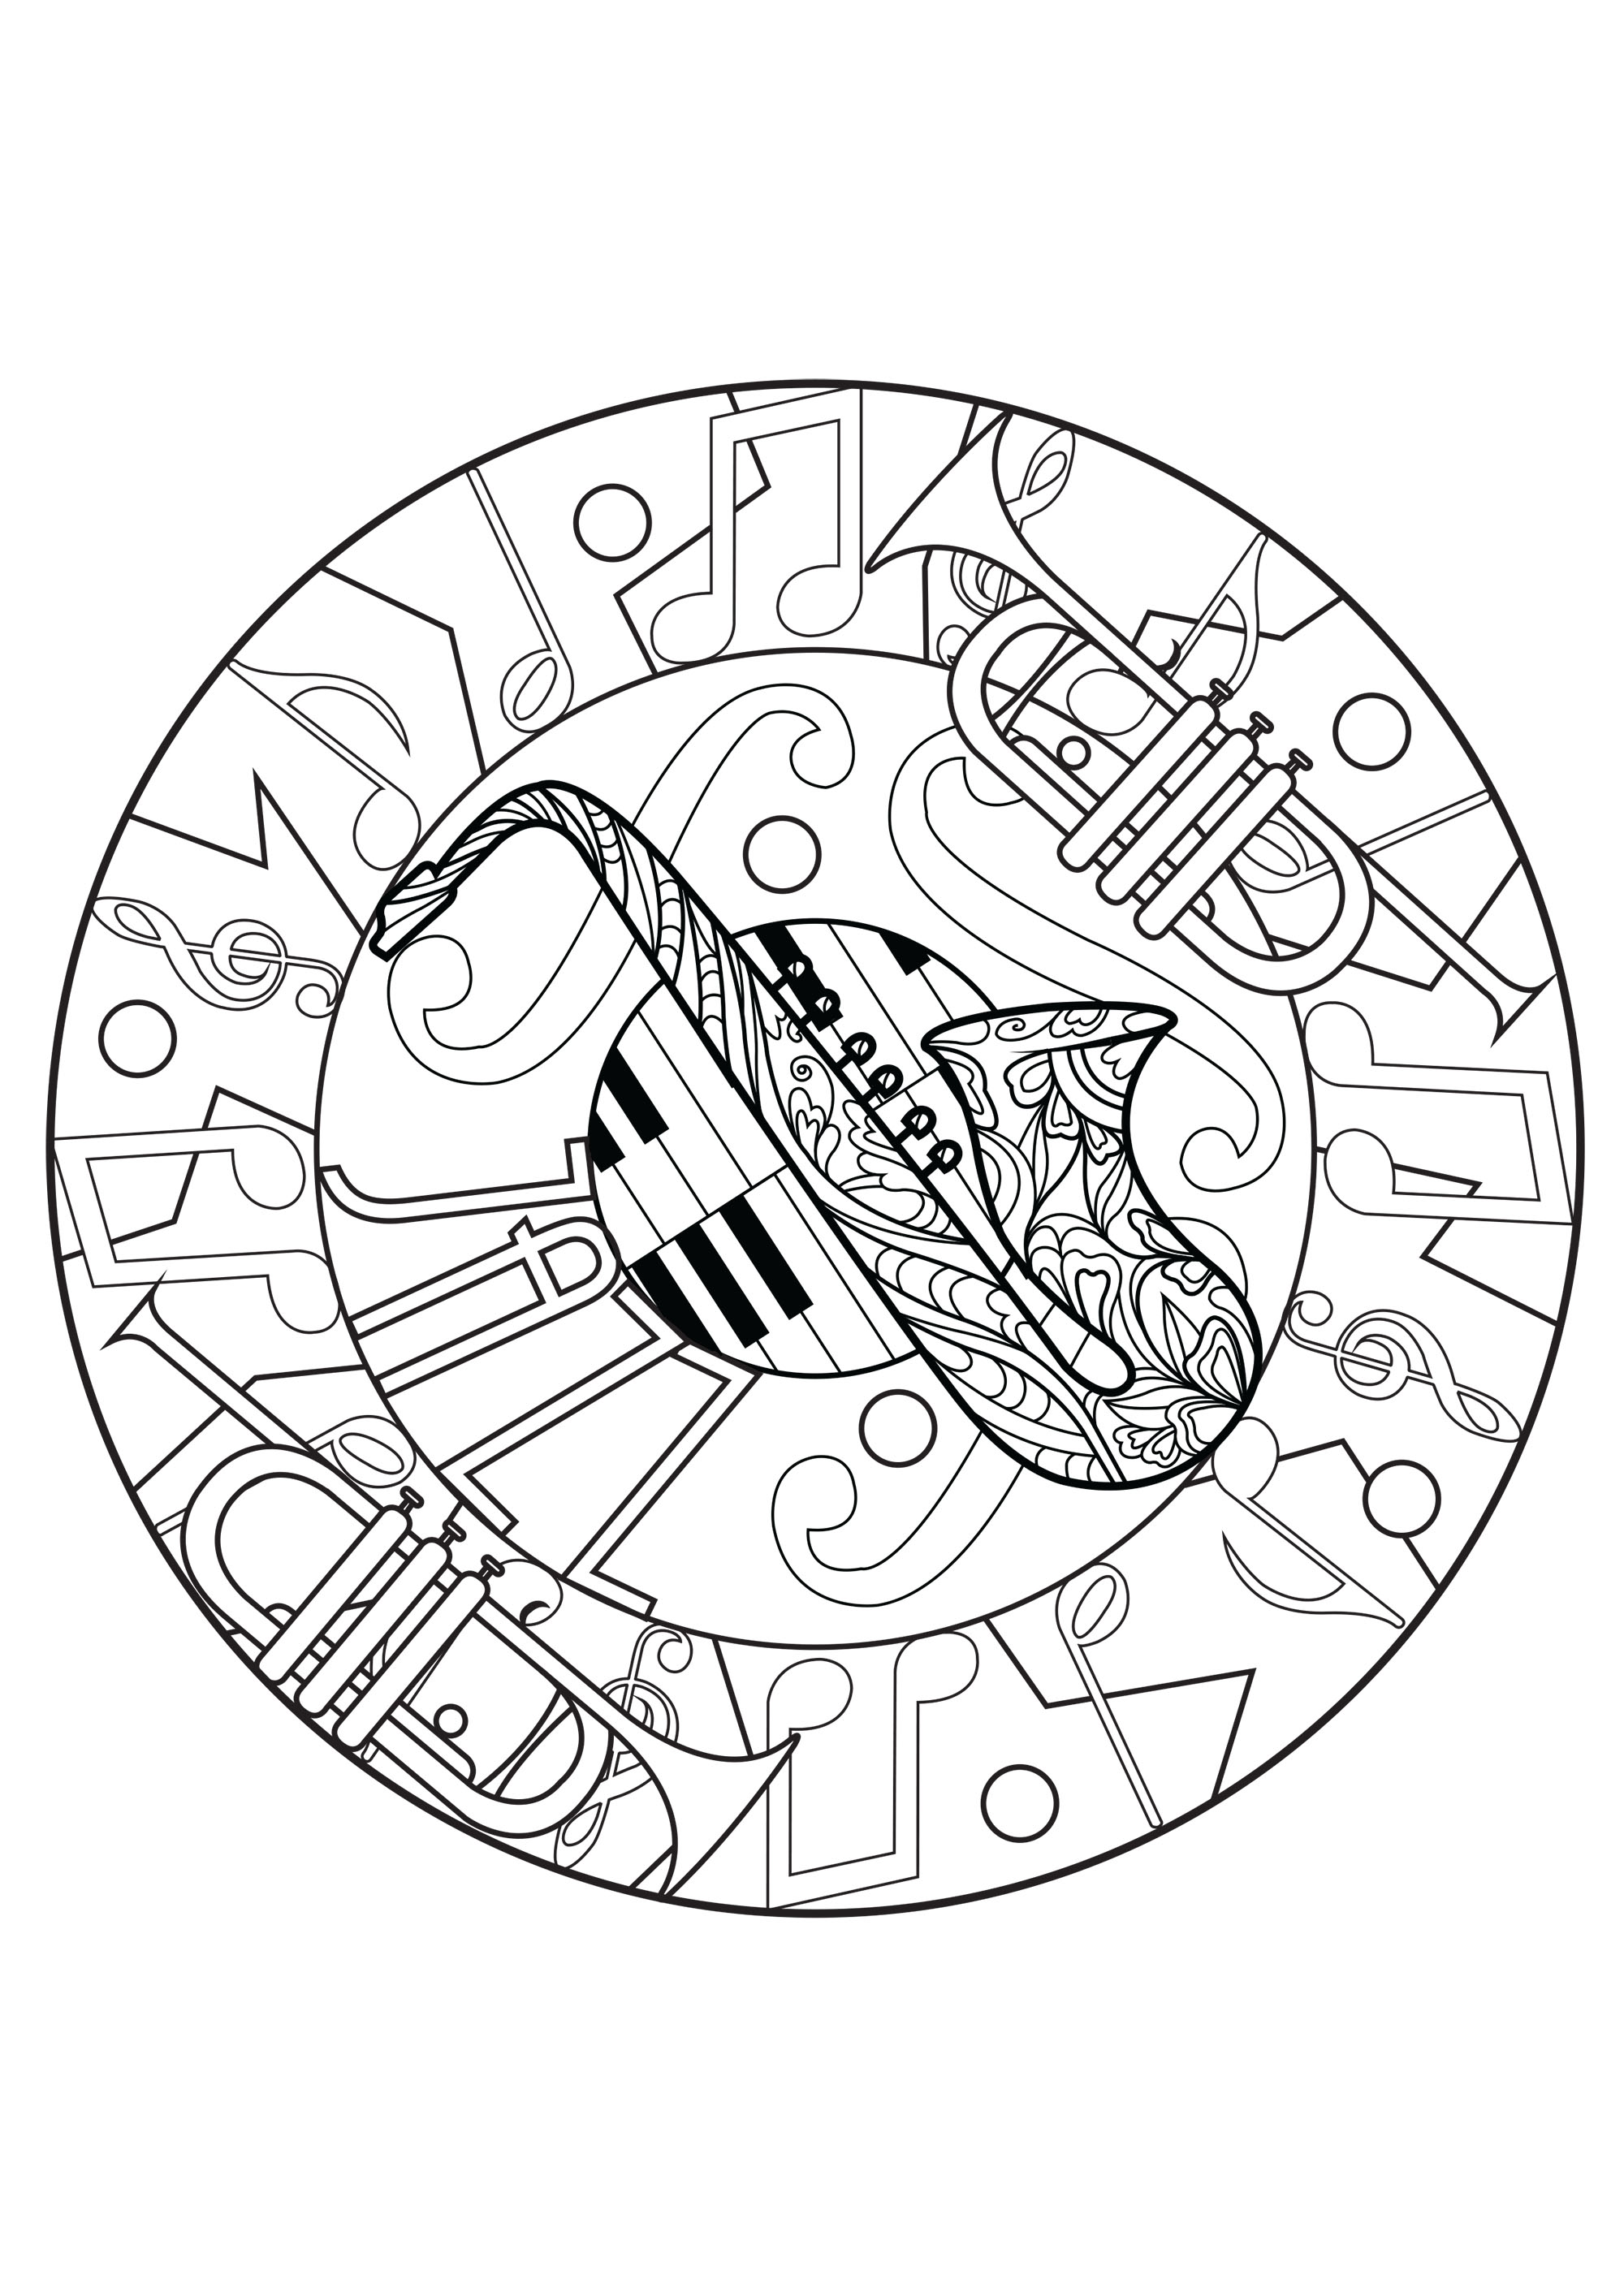 Saxophone Coloring Pages   Best Coloring Pages For Kids